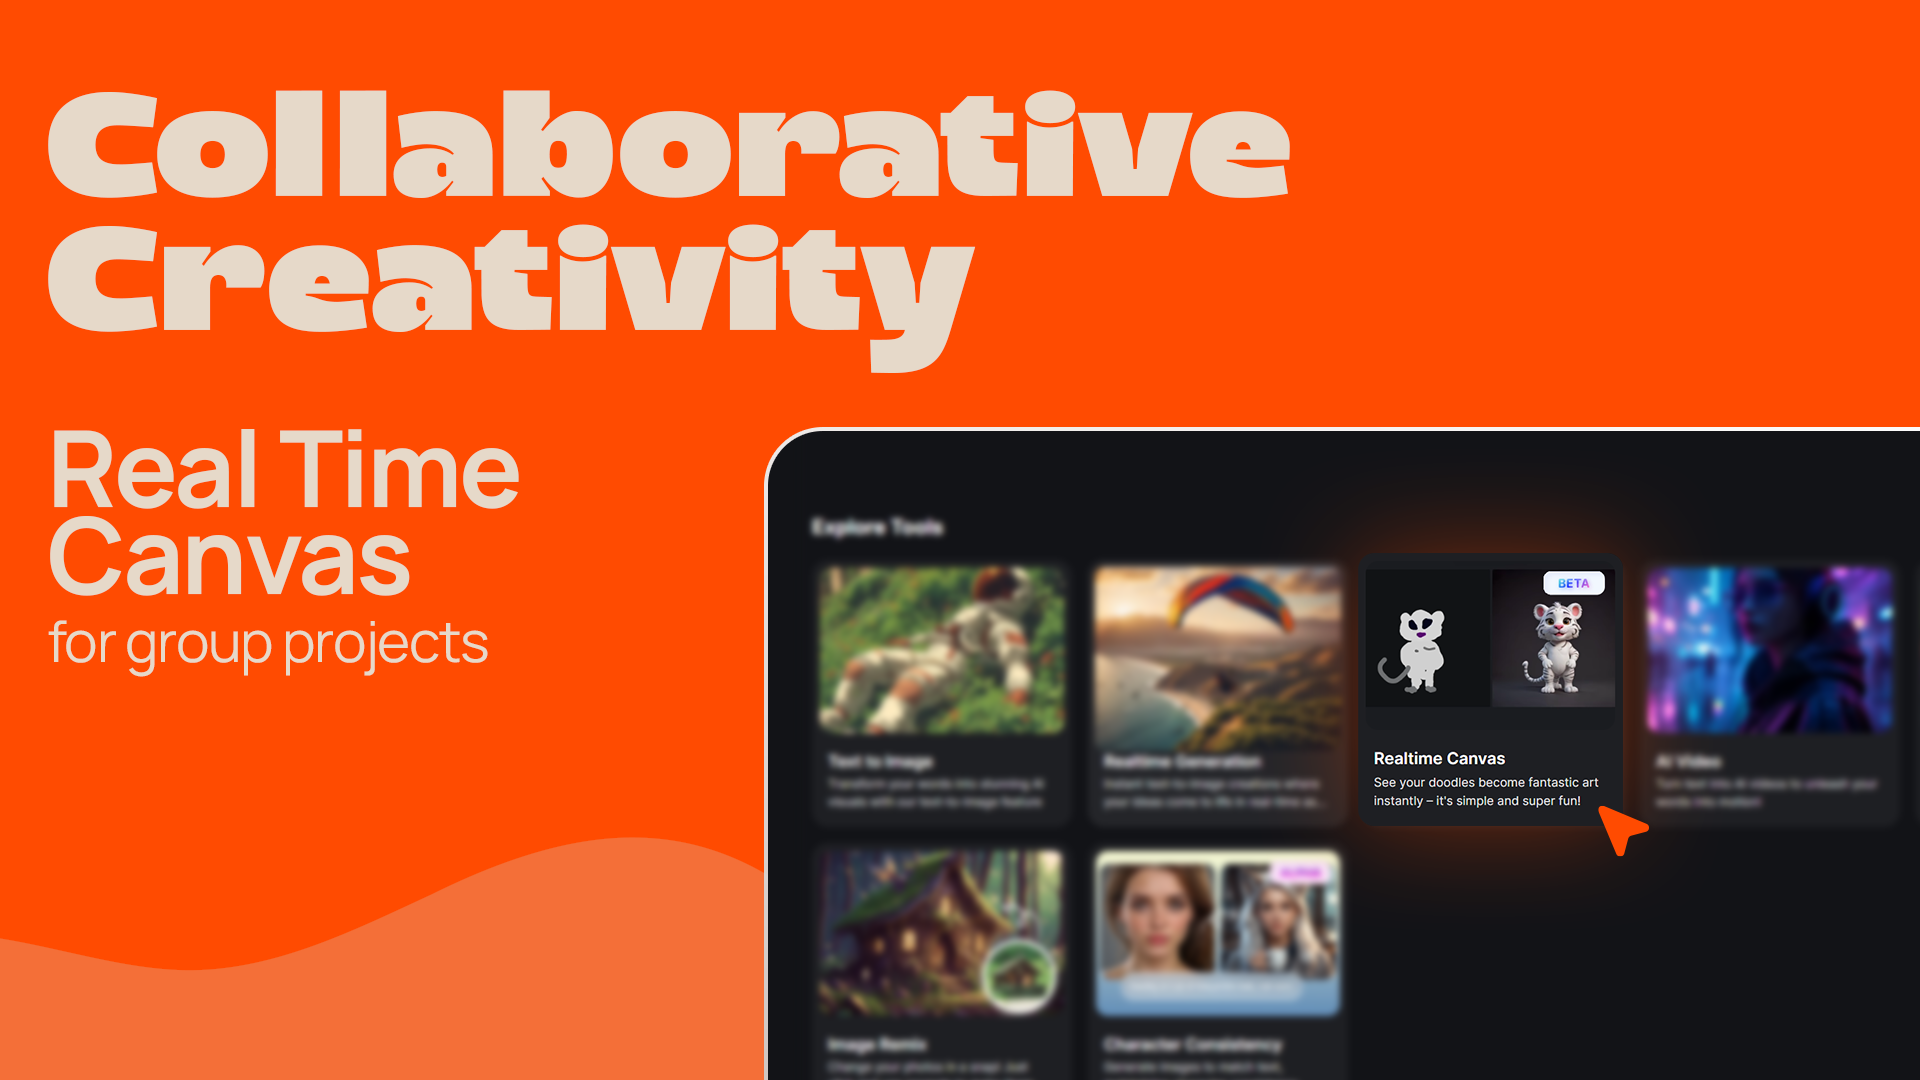 Collaborative Creativity: Ideate for Group Art Projects